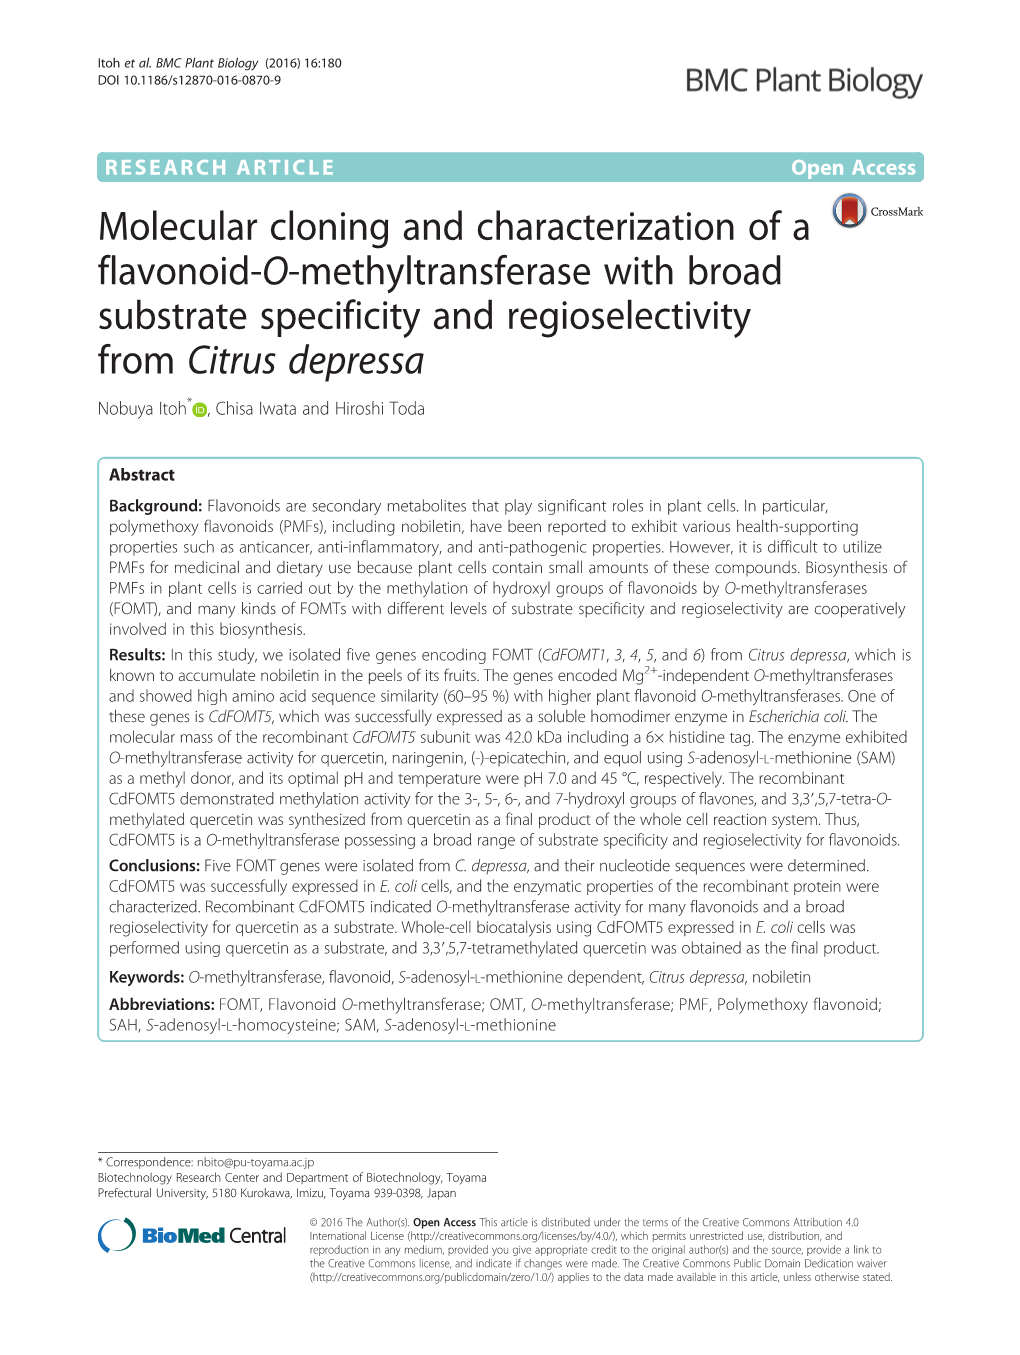 Molecular Cloning and Characterization of a Flavonoid-O